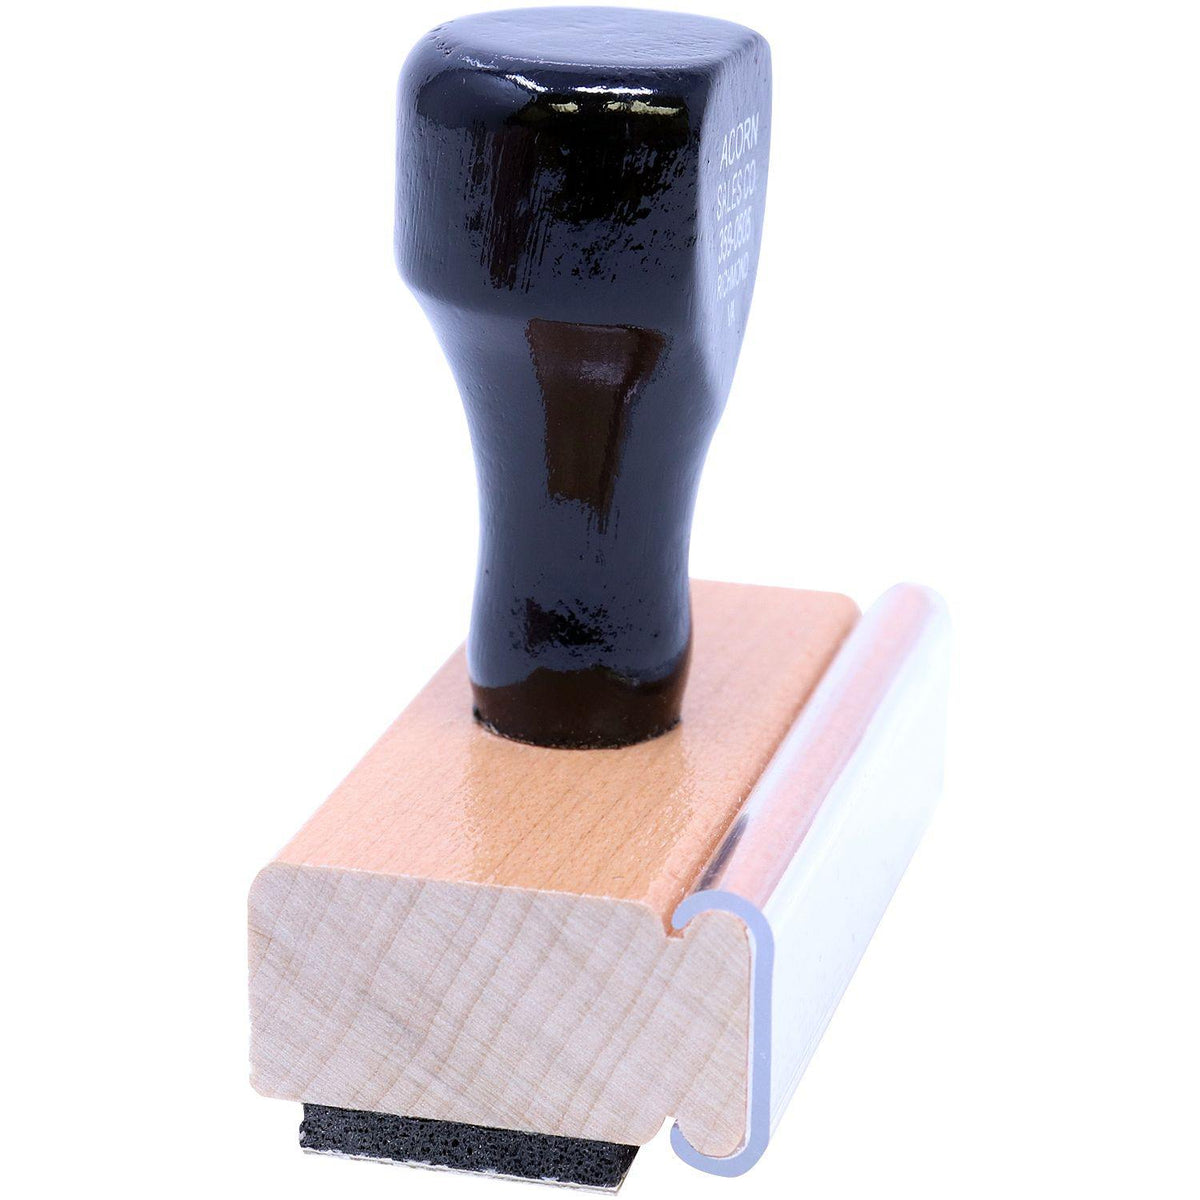 Side View of Large Air Mail Par Avion Rubber Stamp at an Angle